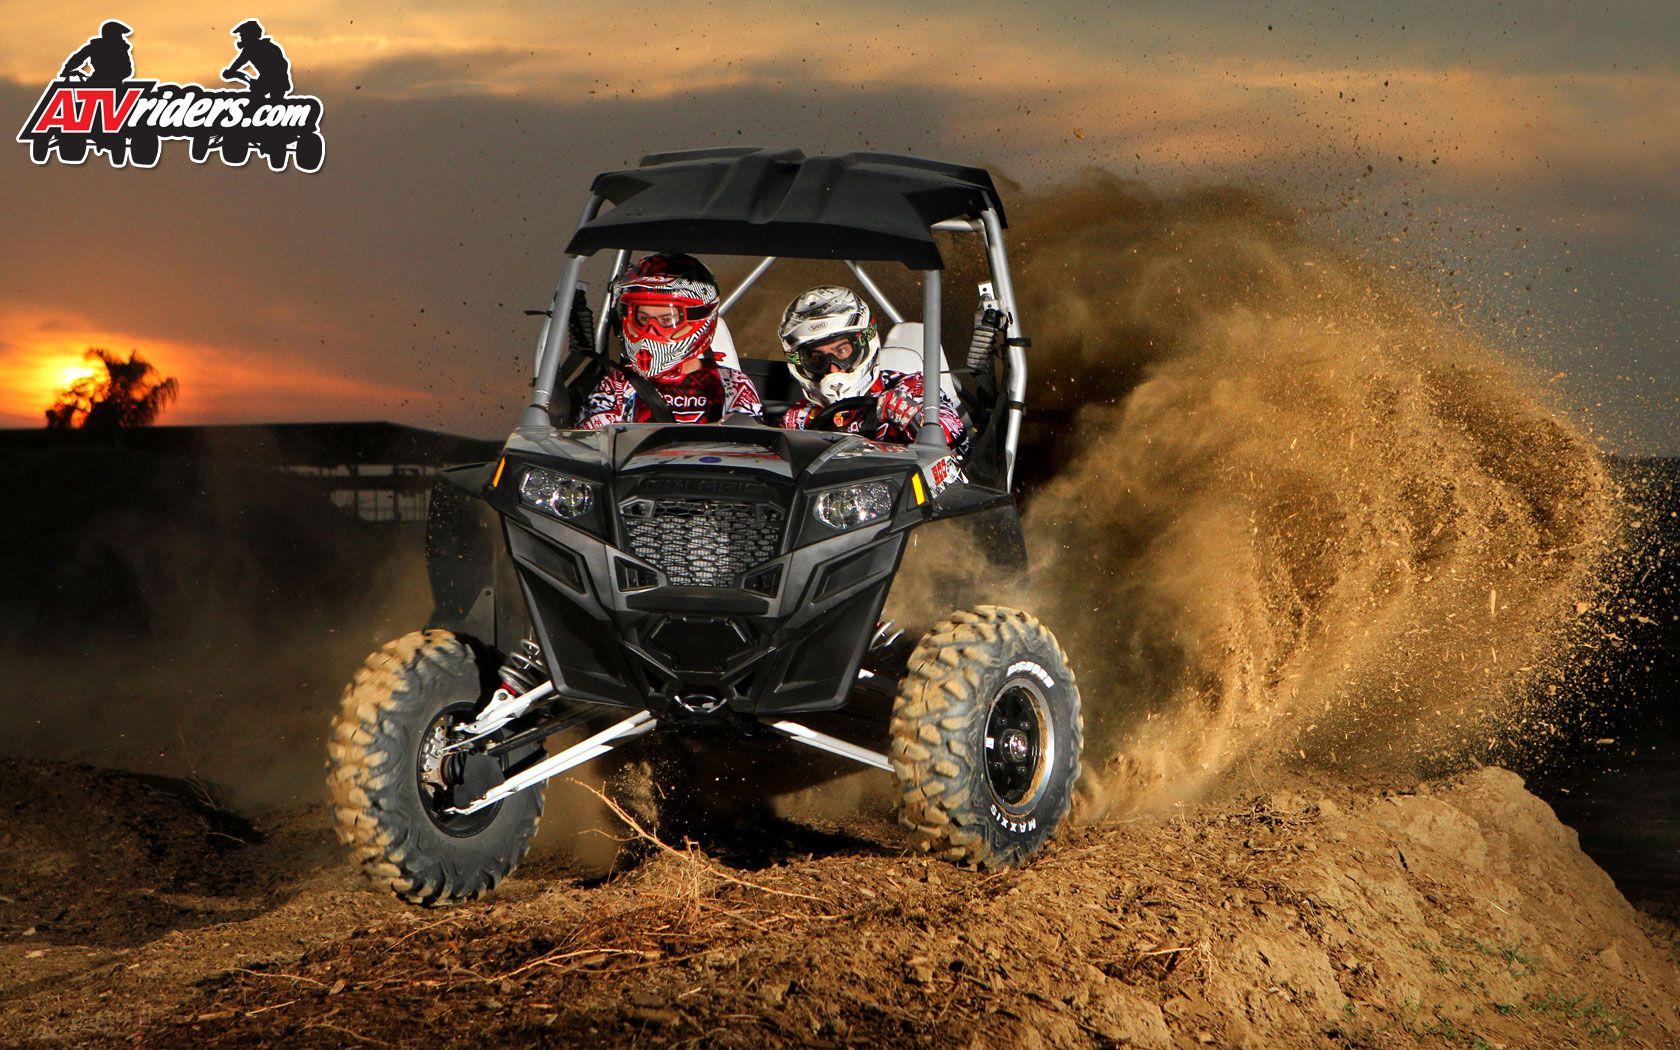 Polaris Teases New RZR Could This Be the Rumored RZR XP Pro R SidebySide